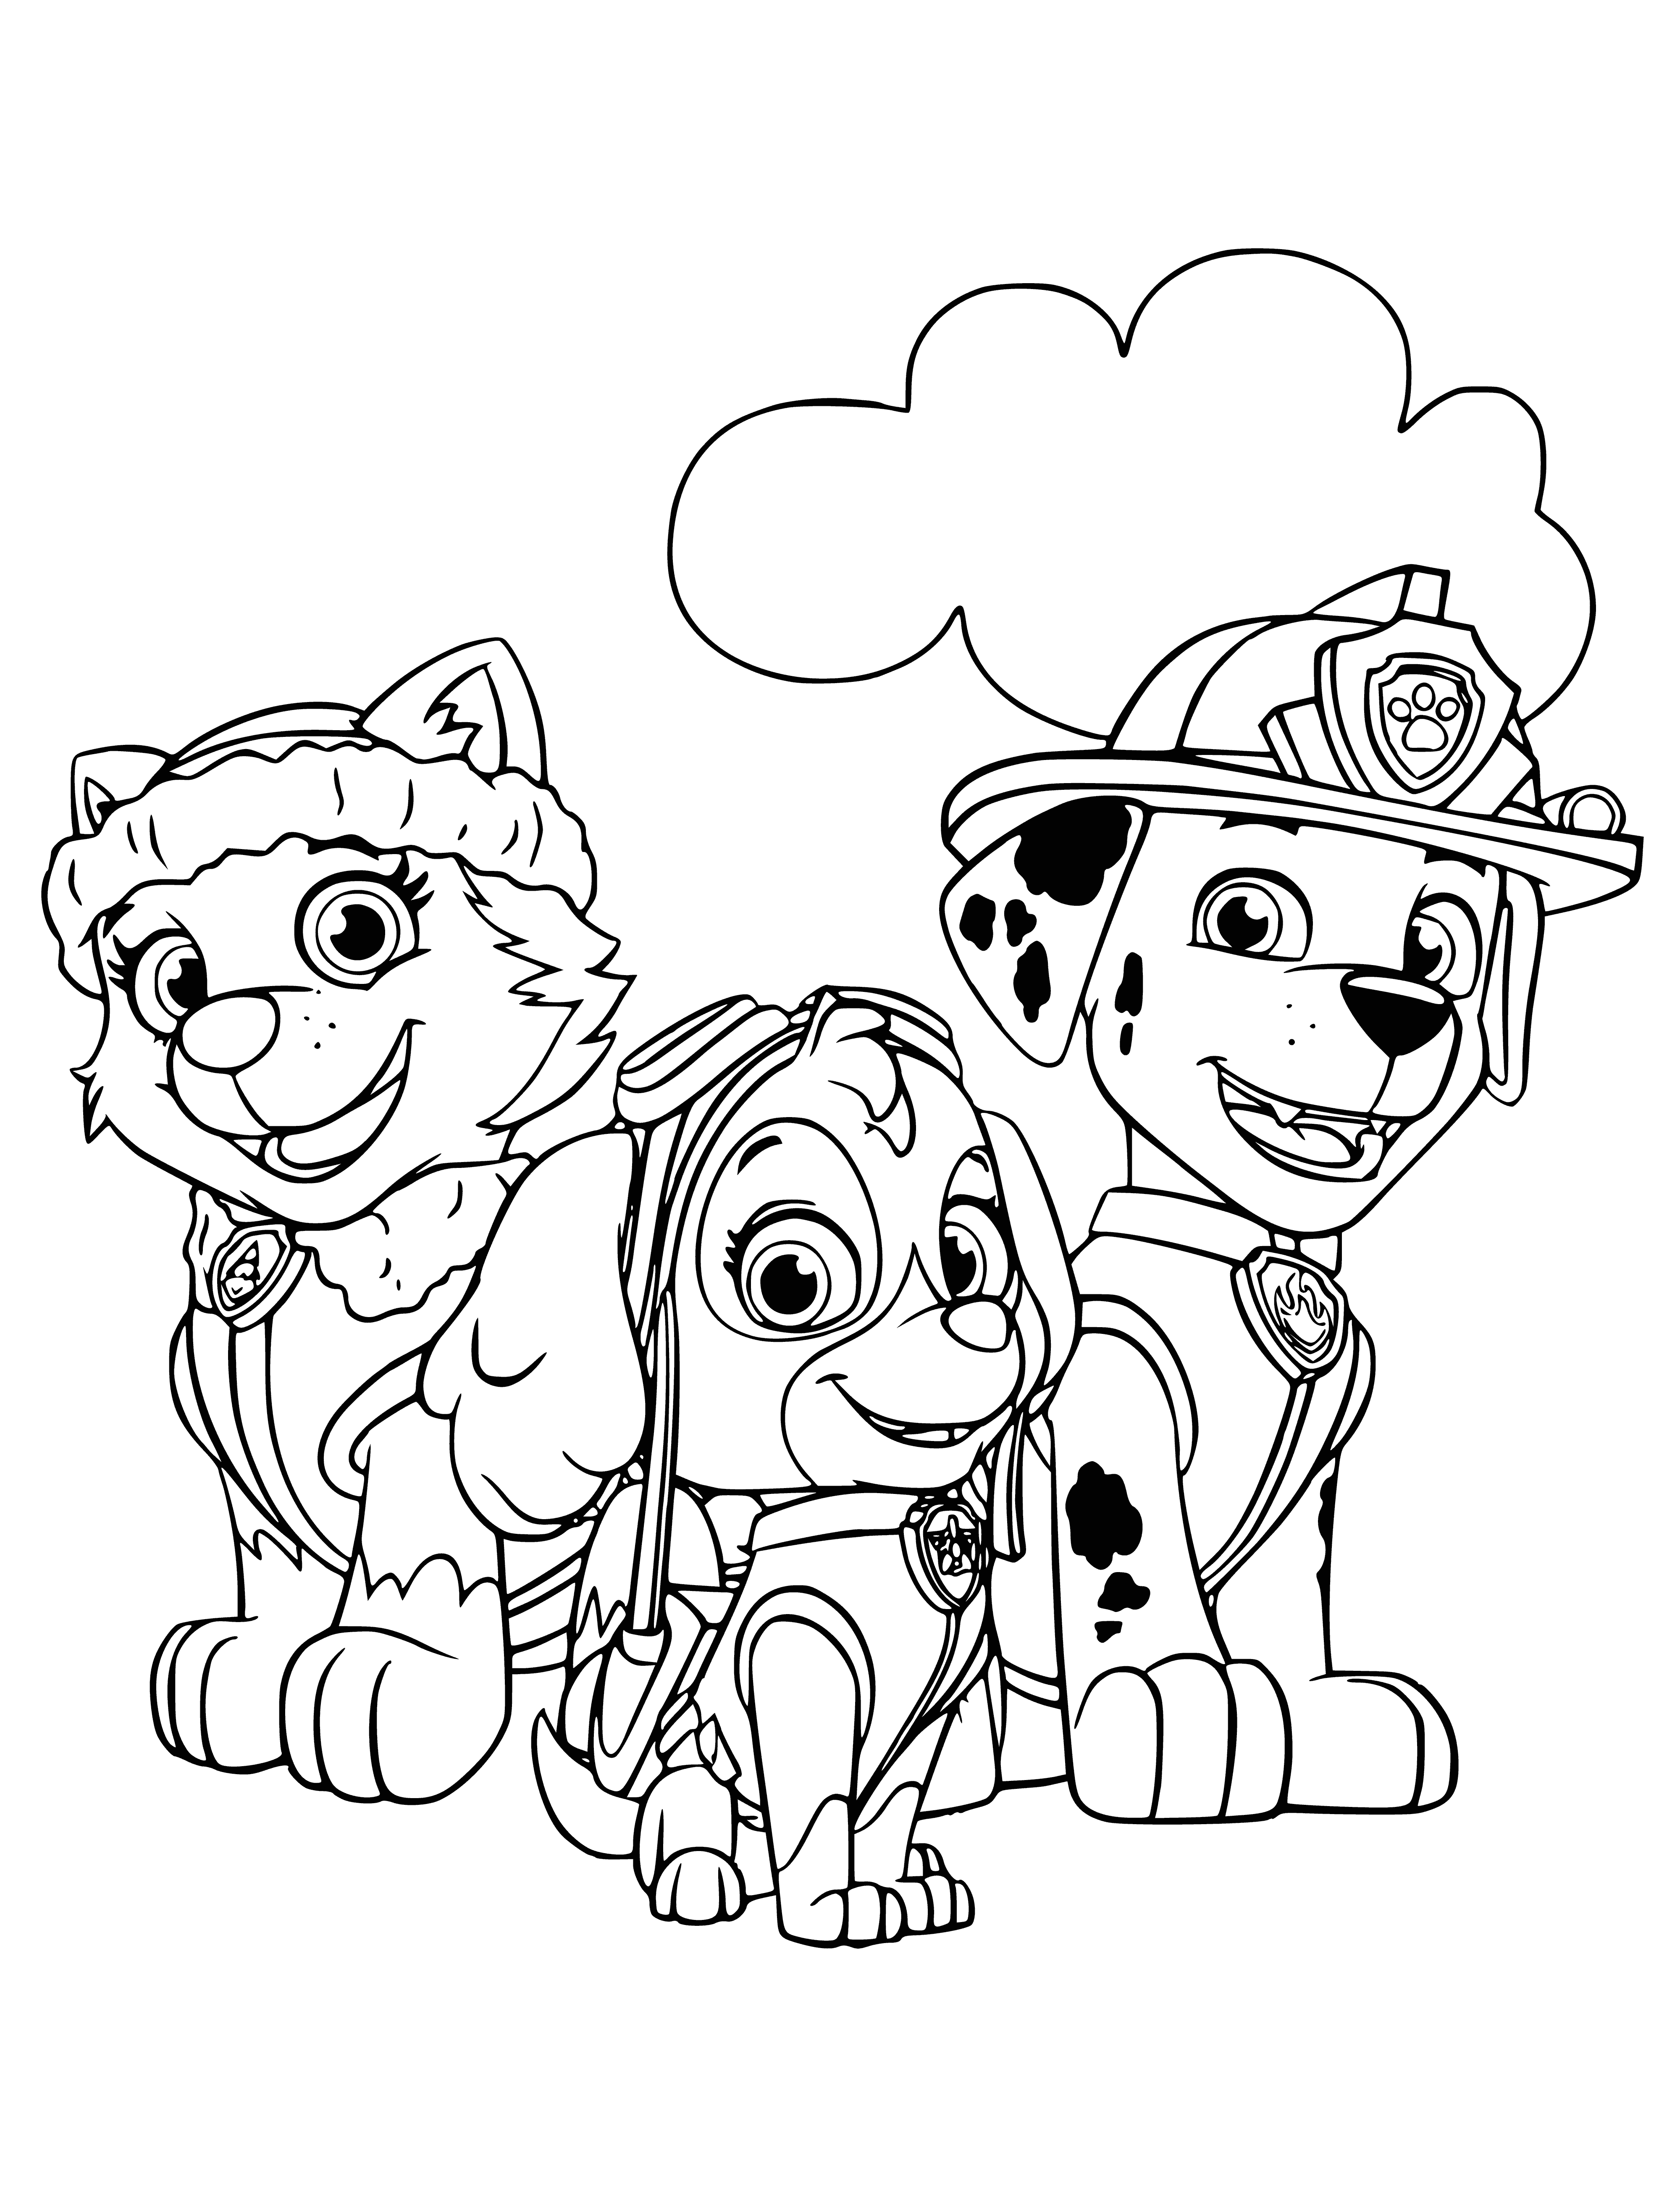 coloring page: The big dog stands atop a mountain with a blue backpack, white bone. The small dog flies in a pink helicopter, while the puppy runs with a red fire truck. #pets #adventure